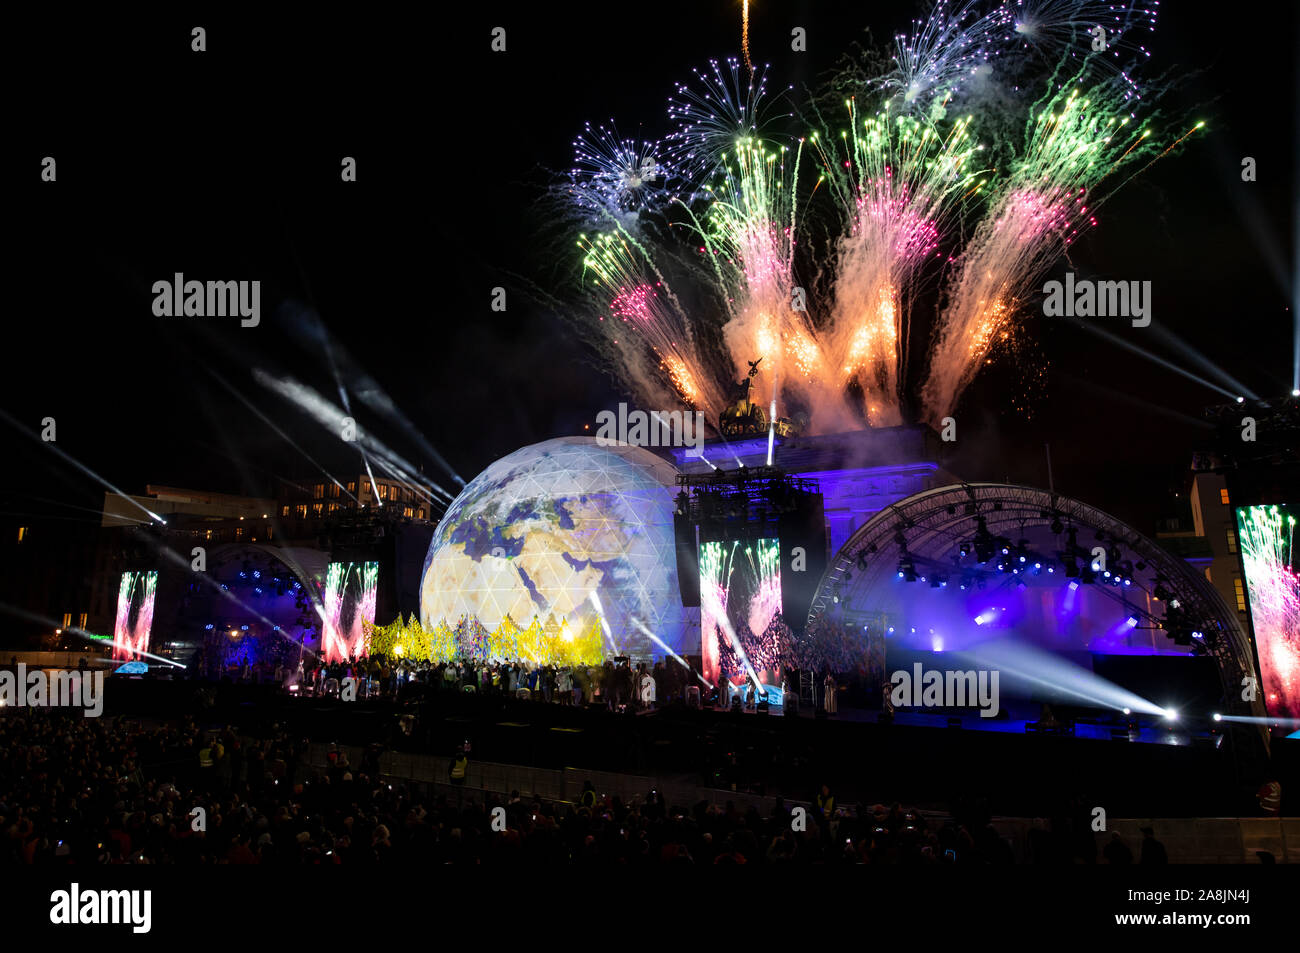 Berlin, Germany. 09th Nov, 2019. A firework display will be shown at the end of the festival week celebrating '30 Years of Peaceful Revolution - Fall of the Wall' at the Brandenburg Gate. Credit: Bernd von Jutrczenka/dpa/Alamy Live News Stock Photo